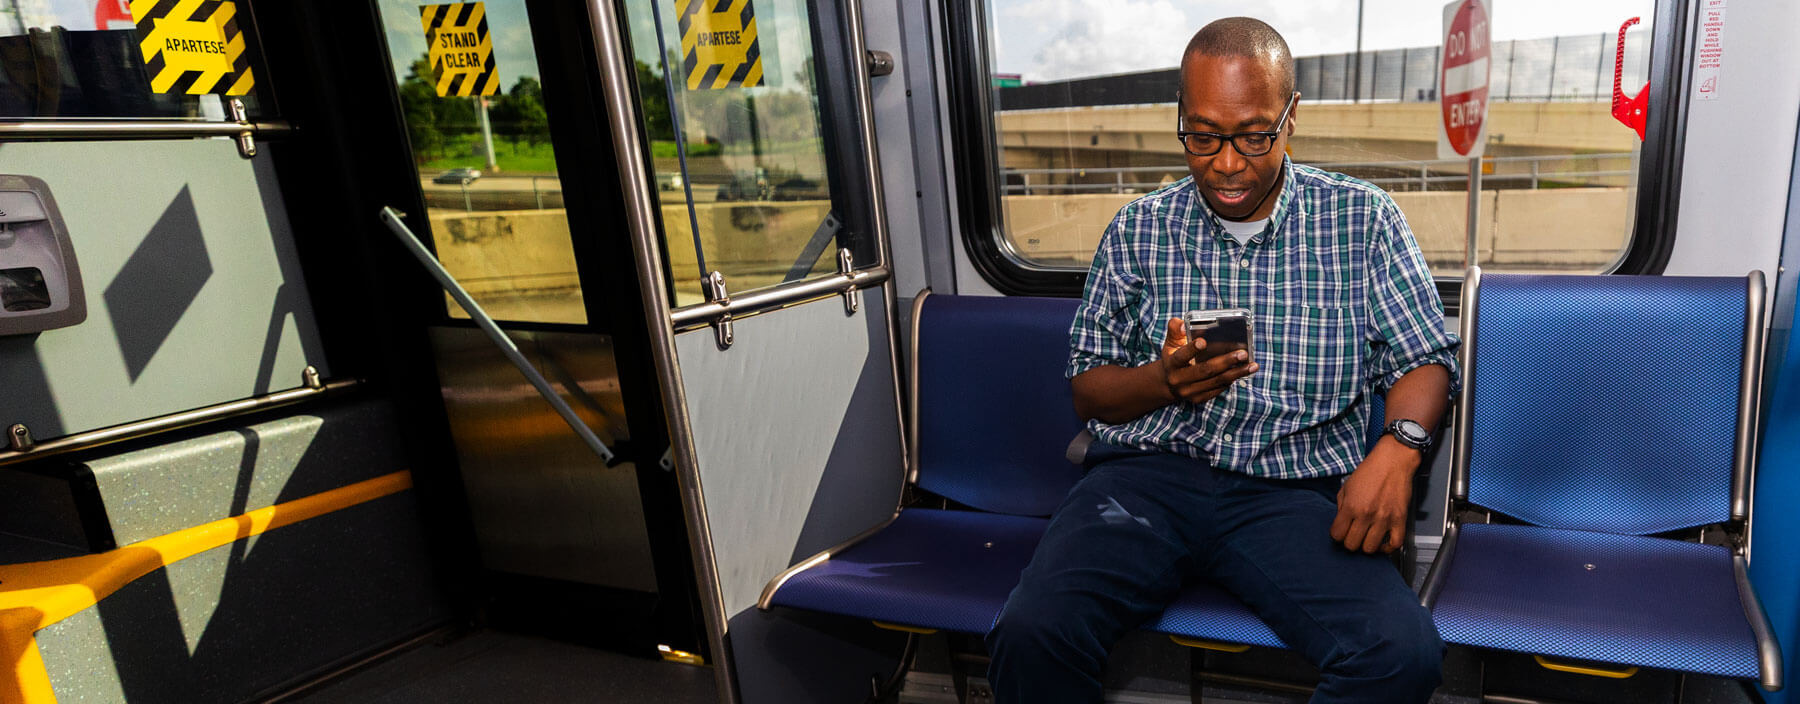 Customer looking at his phone while riding on the METROrail.